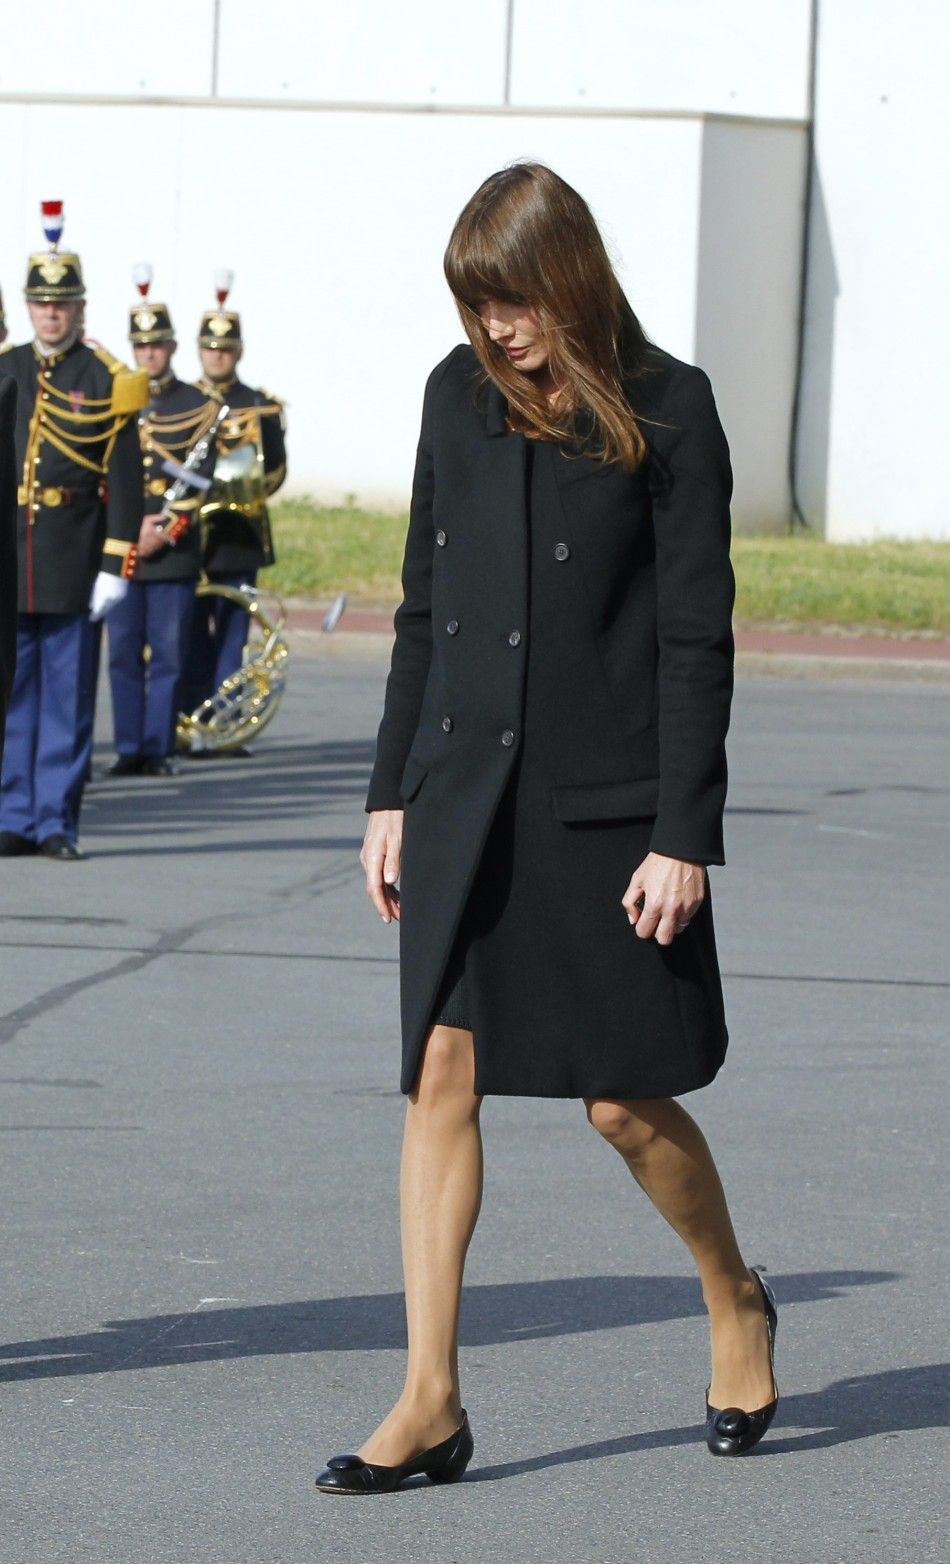 France039s First Lady Carla Bruni-Sarkozy arrives to attend a ceremony at Orly airport in memory of the eight French citizens who were killed in a bomb attack at cafe in Marrakesh